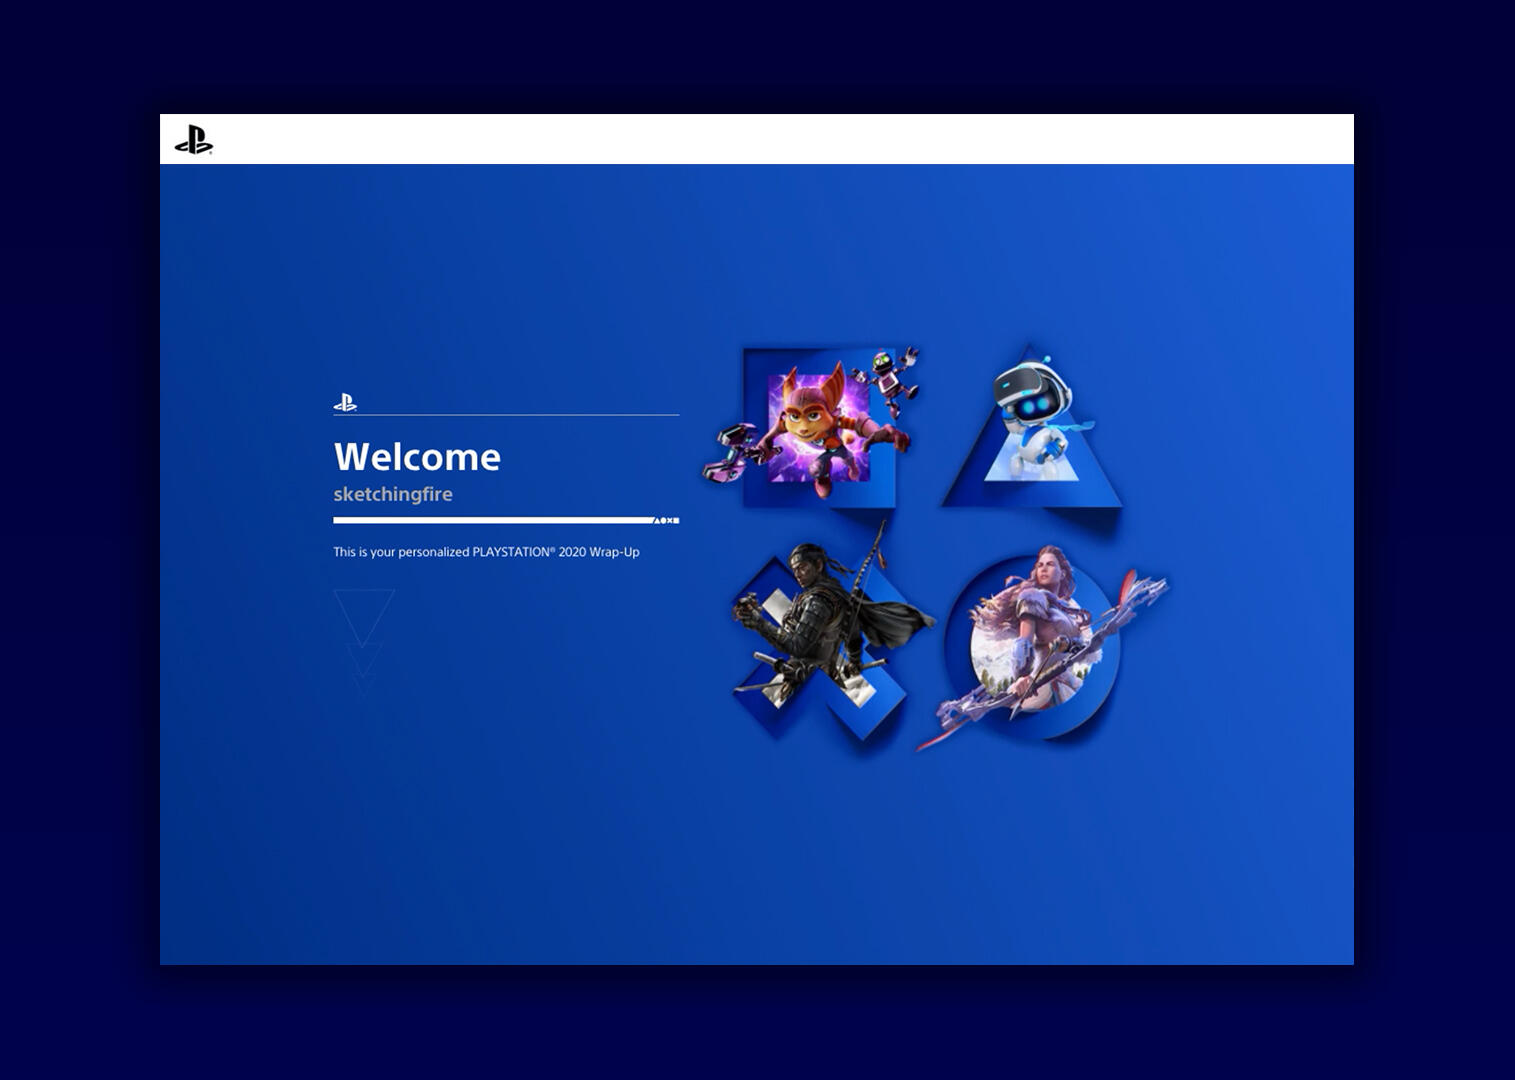 PS Wrap up - Landing page